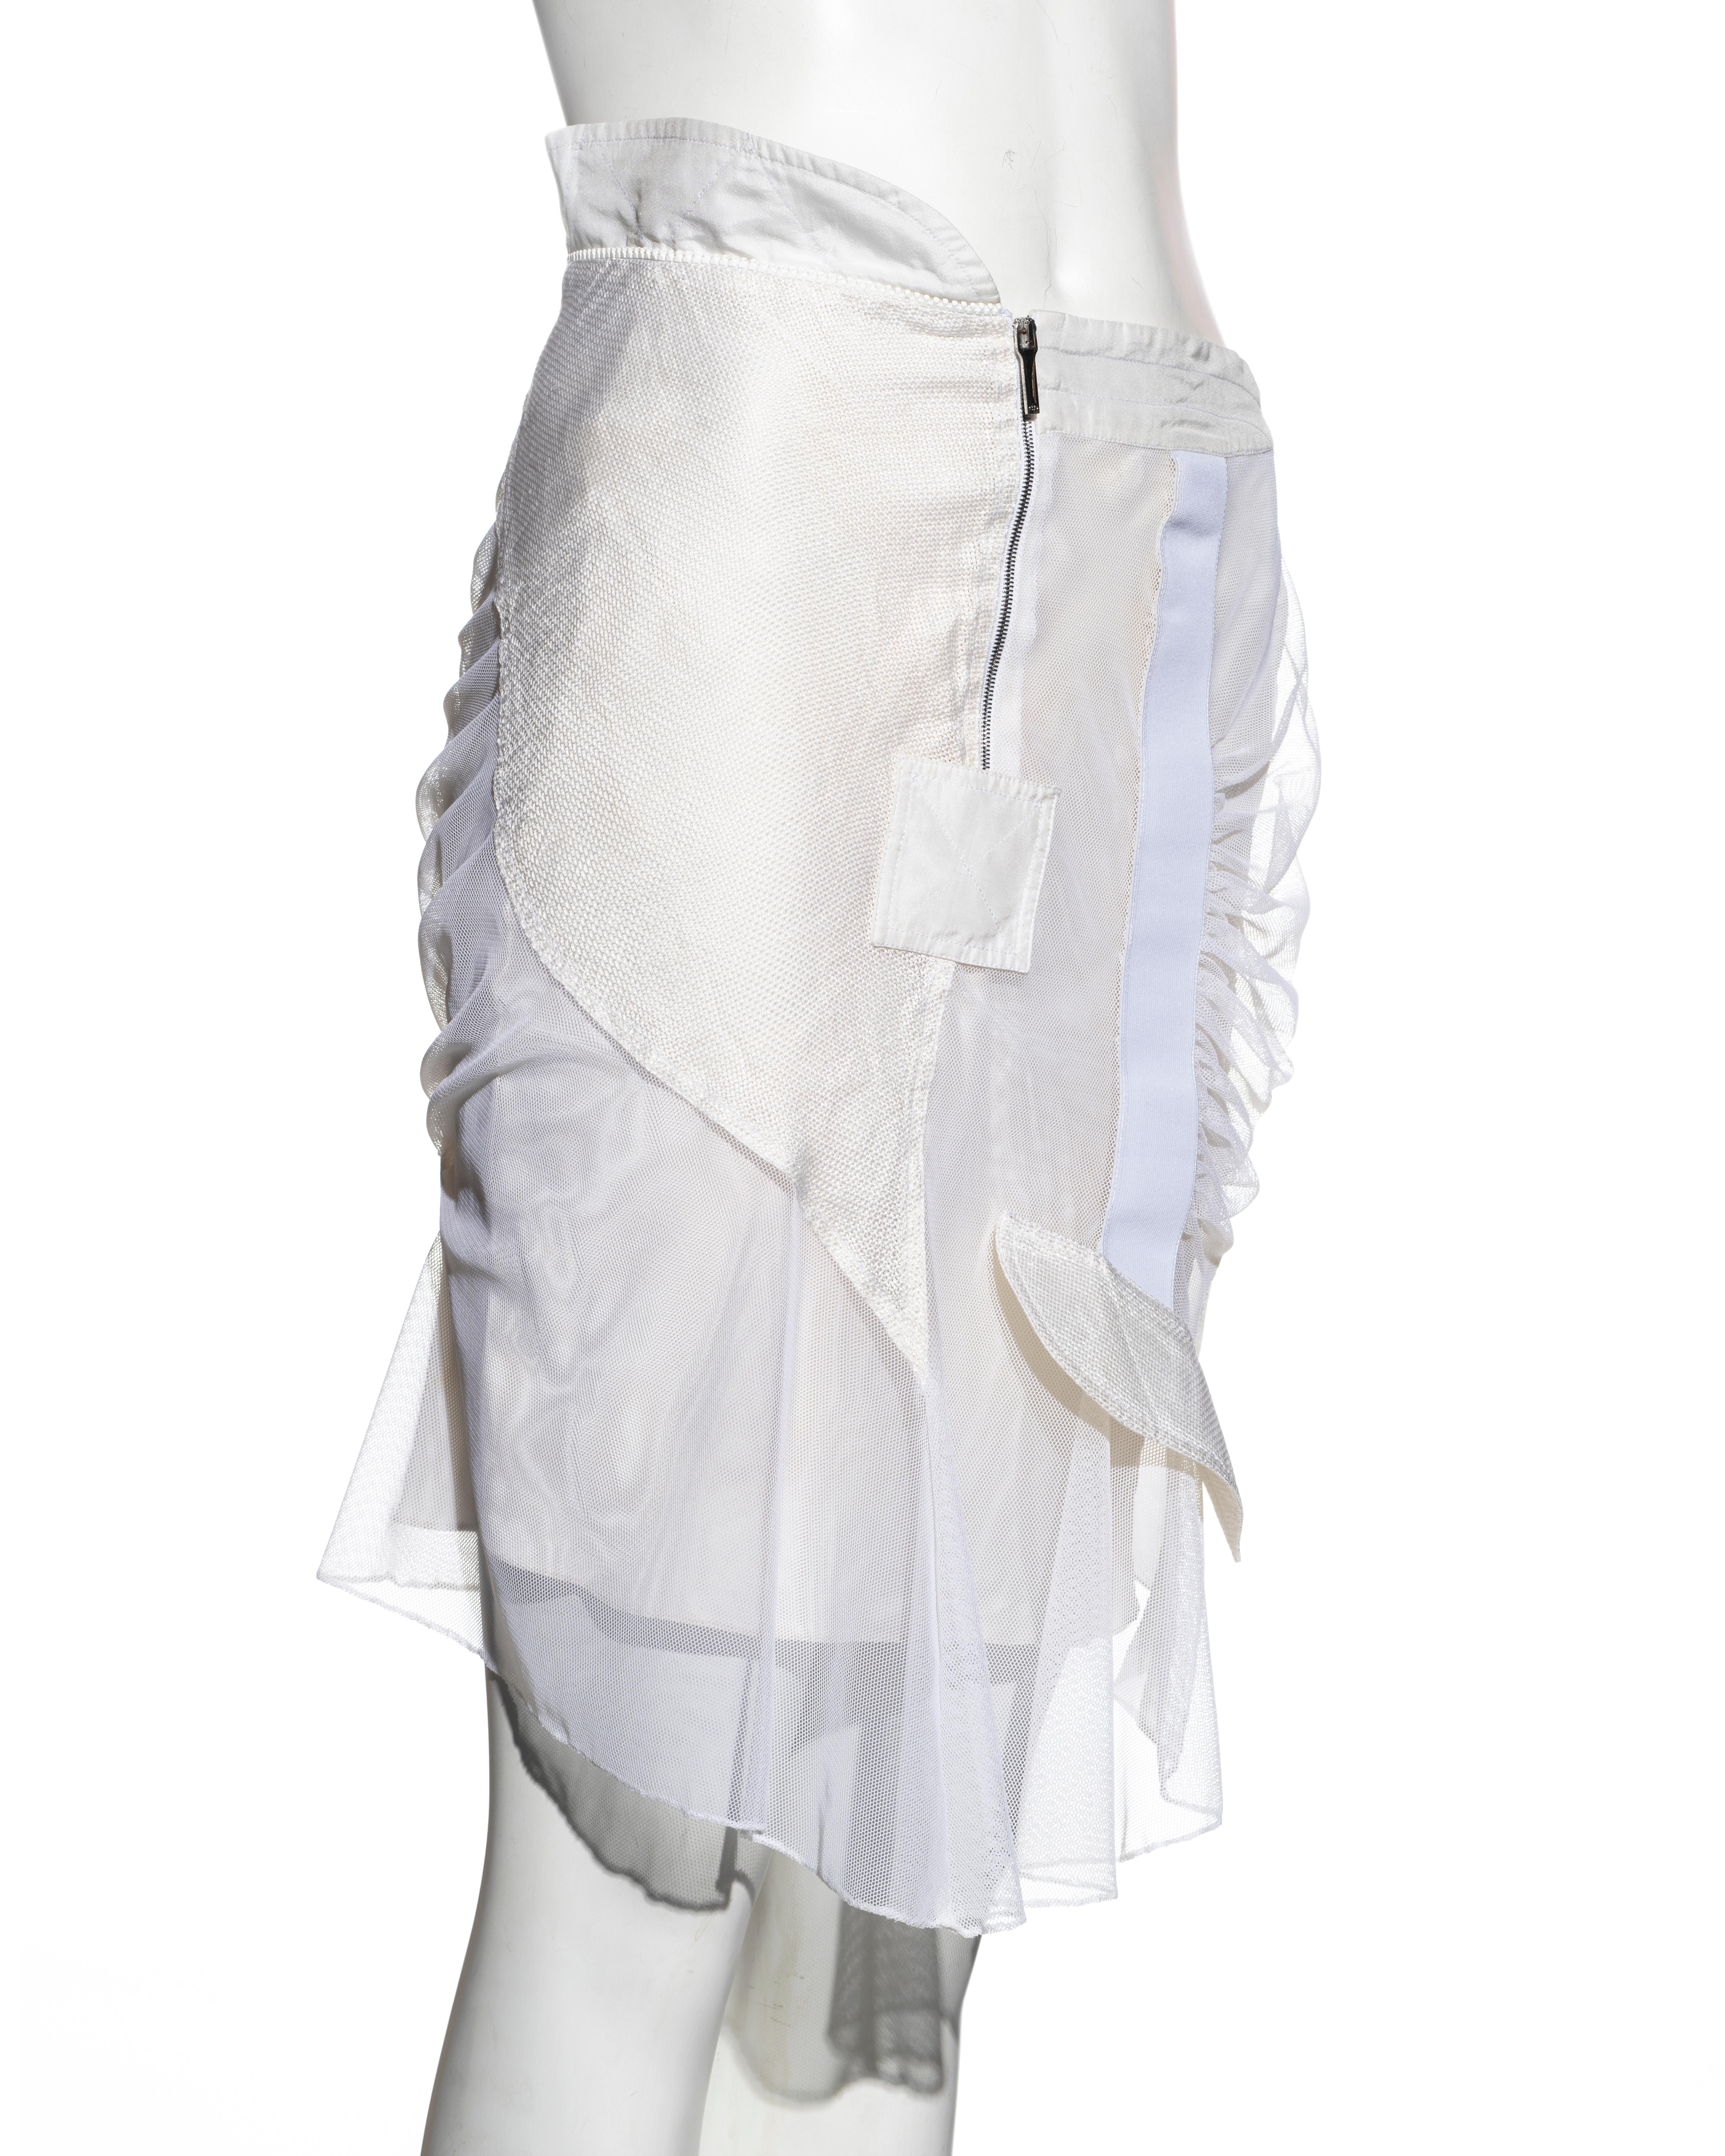 Gray Christian Dior by John Galliano white mesh and silk deconstructed skirt,  ss 2002